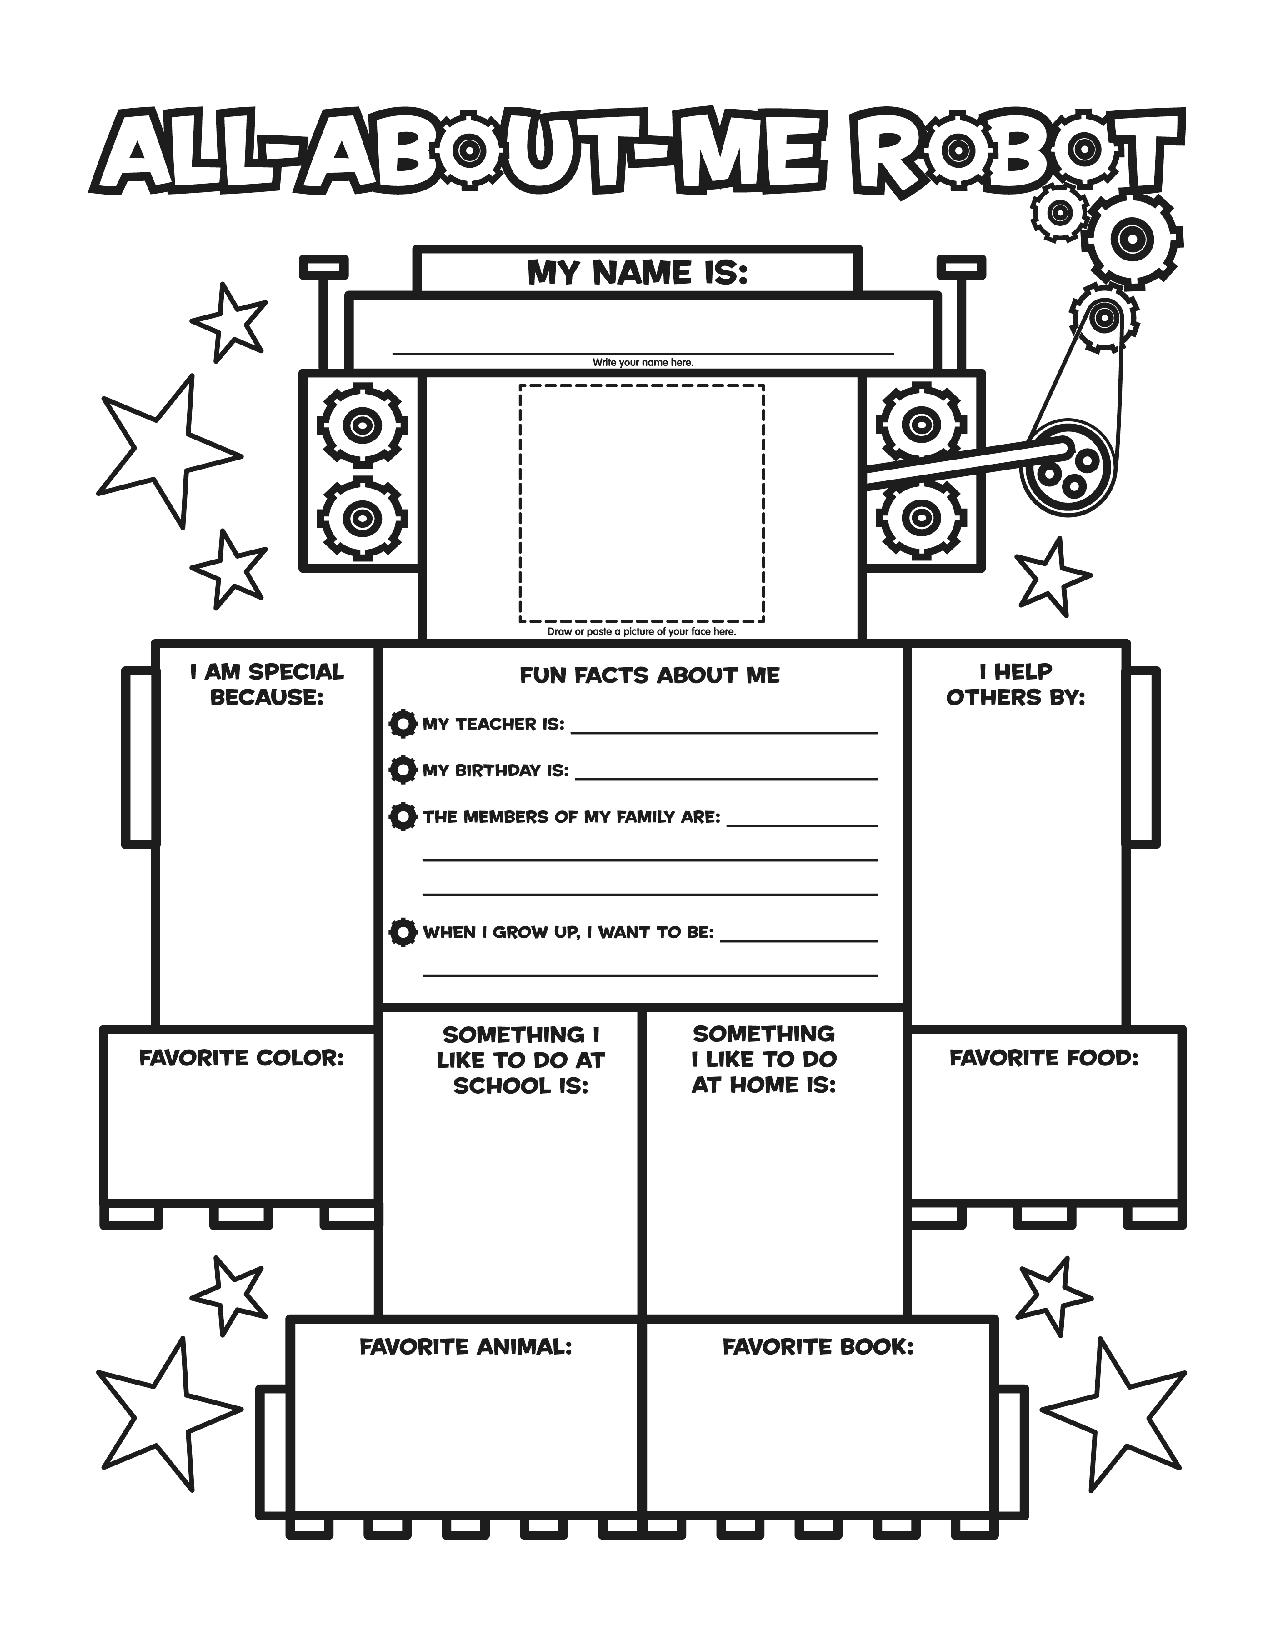 about-me-worksheet-high-school-unique-back-to-school-first-activity-idea-middle-activ-middle